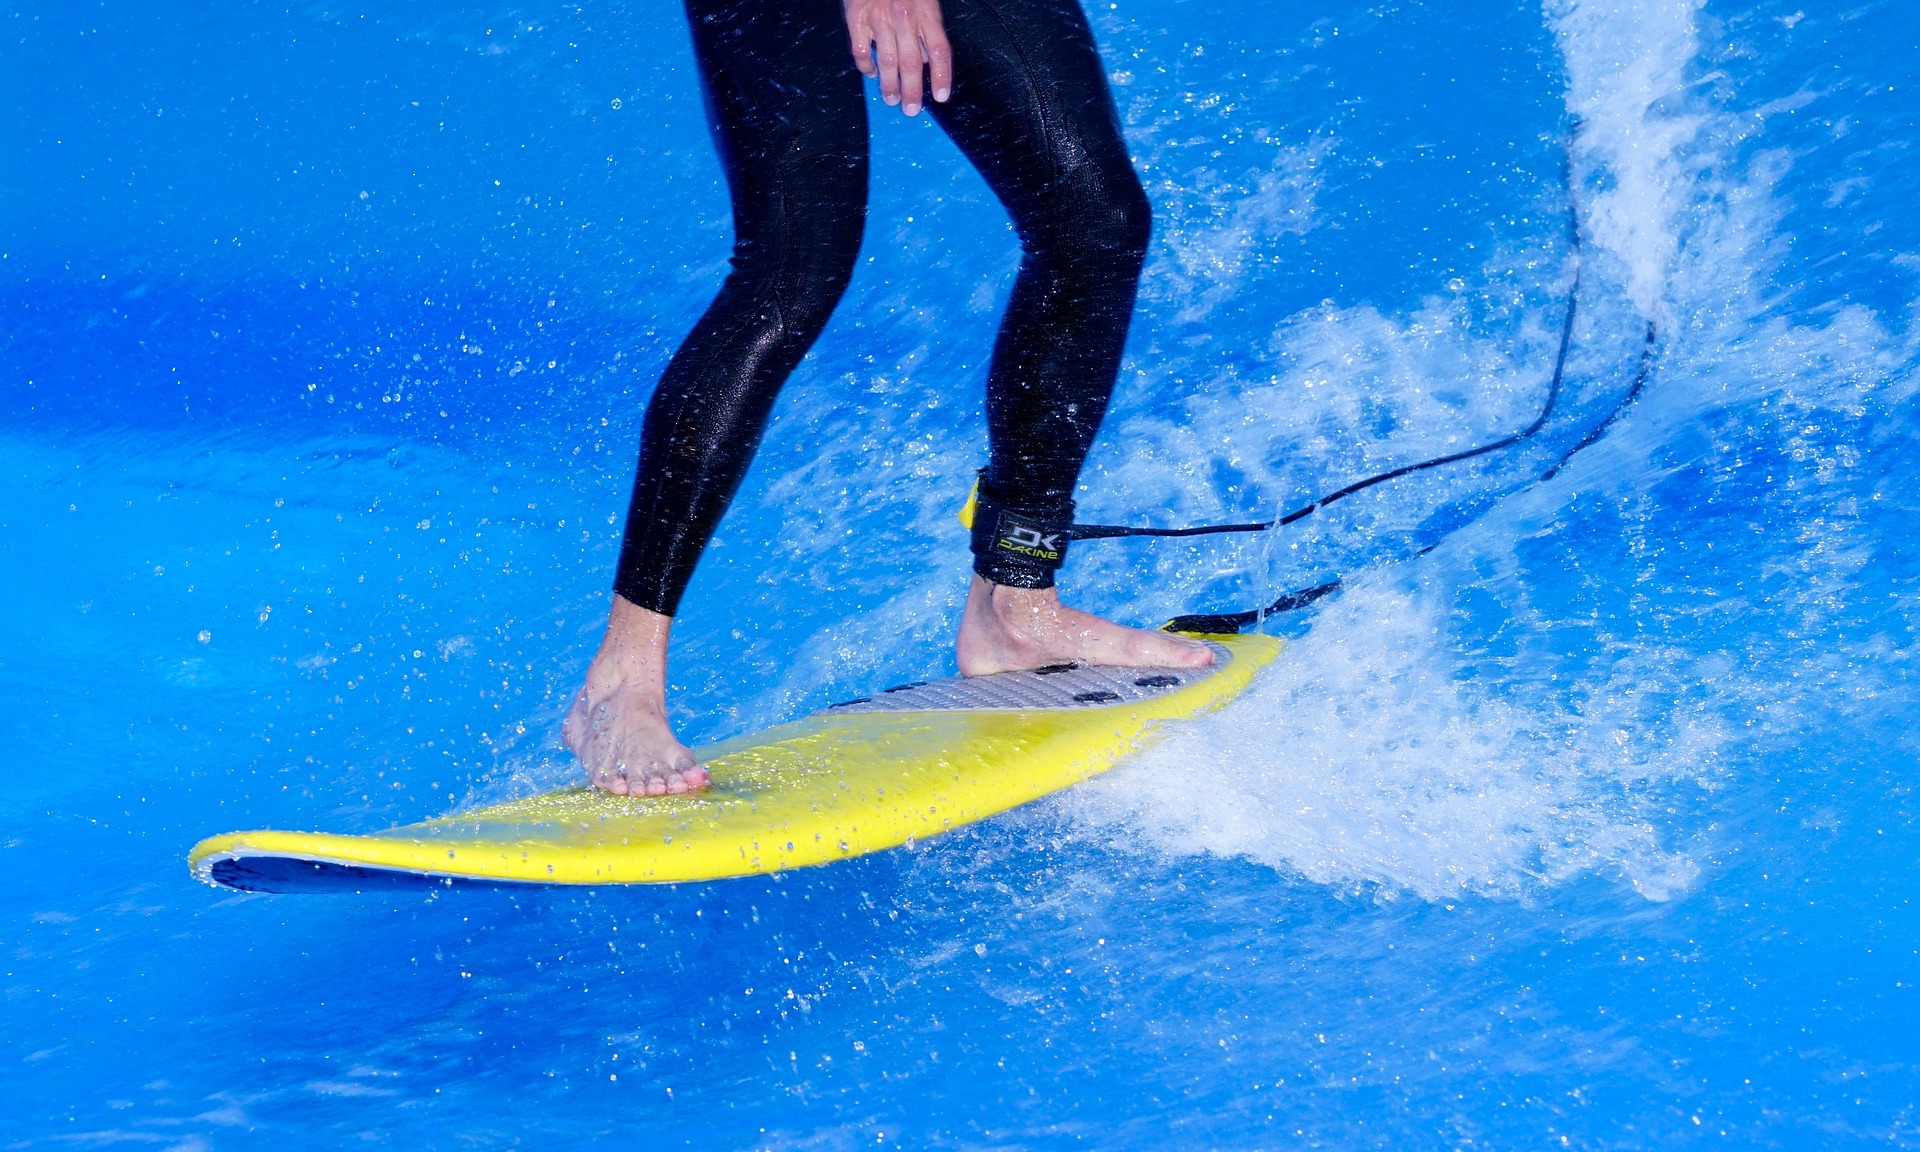 Surfer using balance to stand on his surfboard.